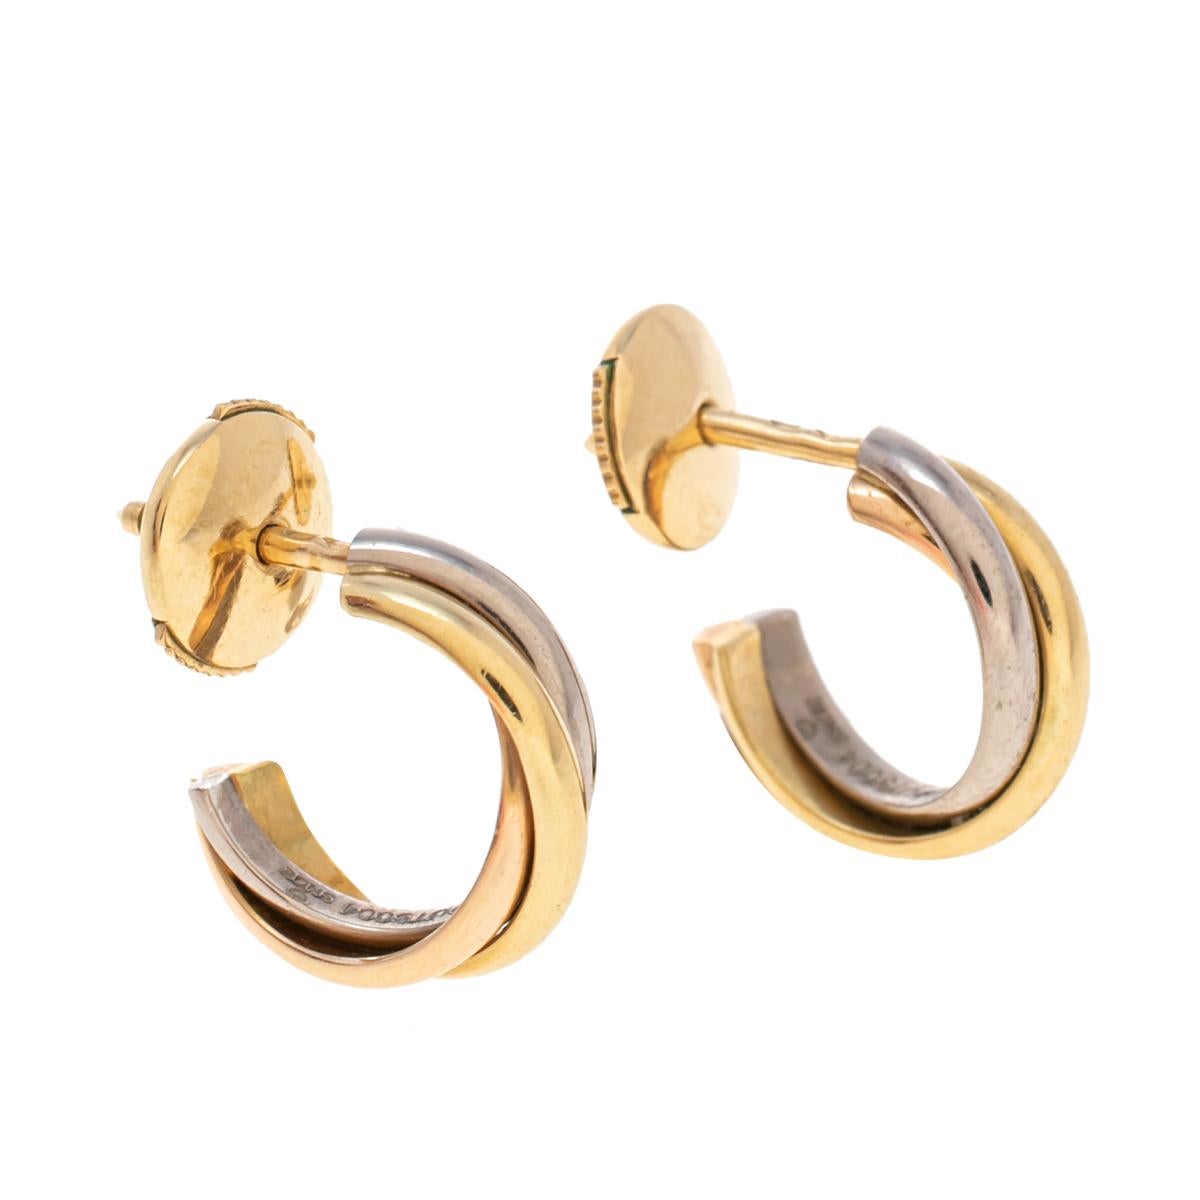 Cartier earrings are timeless everyday wear. Designed in a hoop shape, these Cartier Trinity earrings feature an elegant, curved structure that beautifully wraps around your lobe and is finished with omega earrings back. They are made of 18K